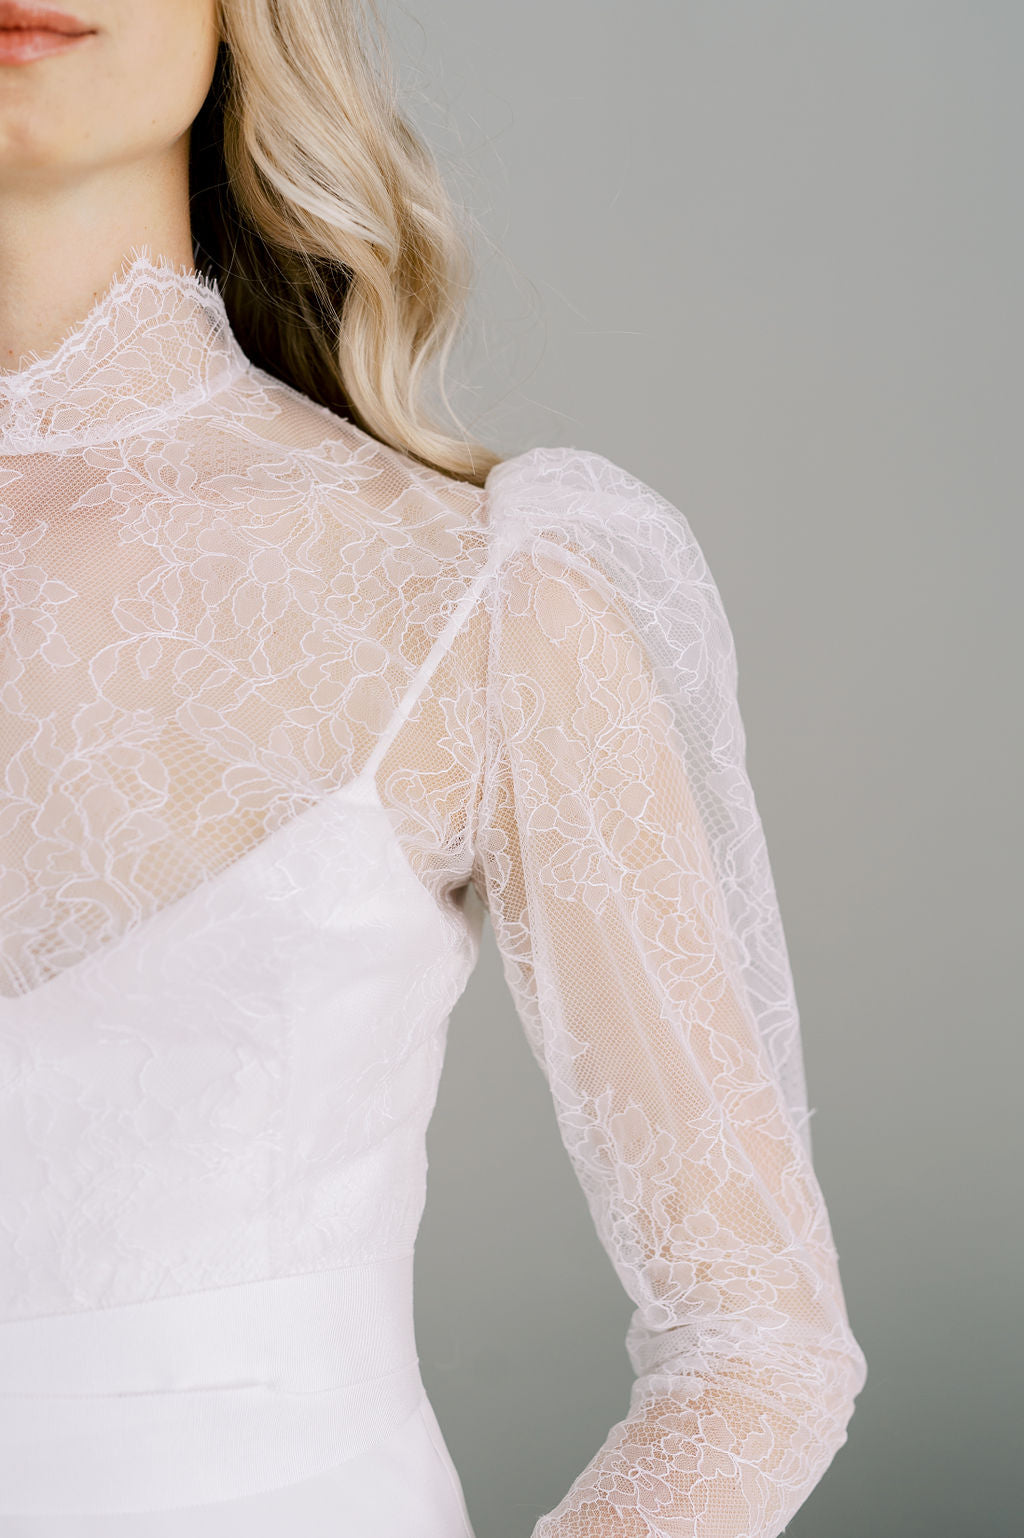 High neck lace wedding top. Handmade by Catherine Langlois, Toronto.